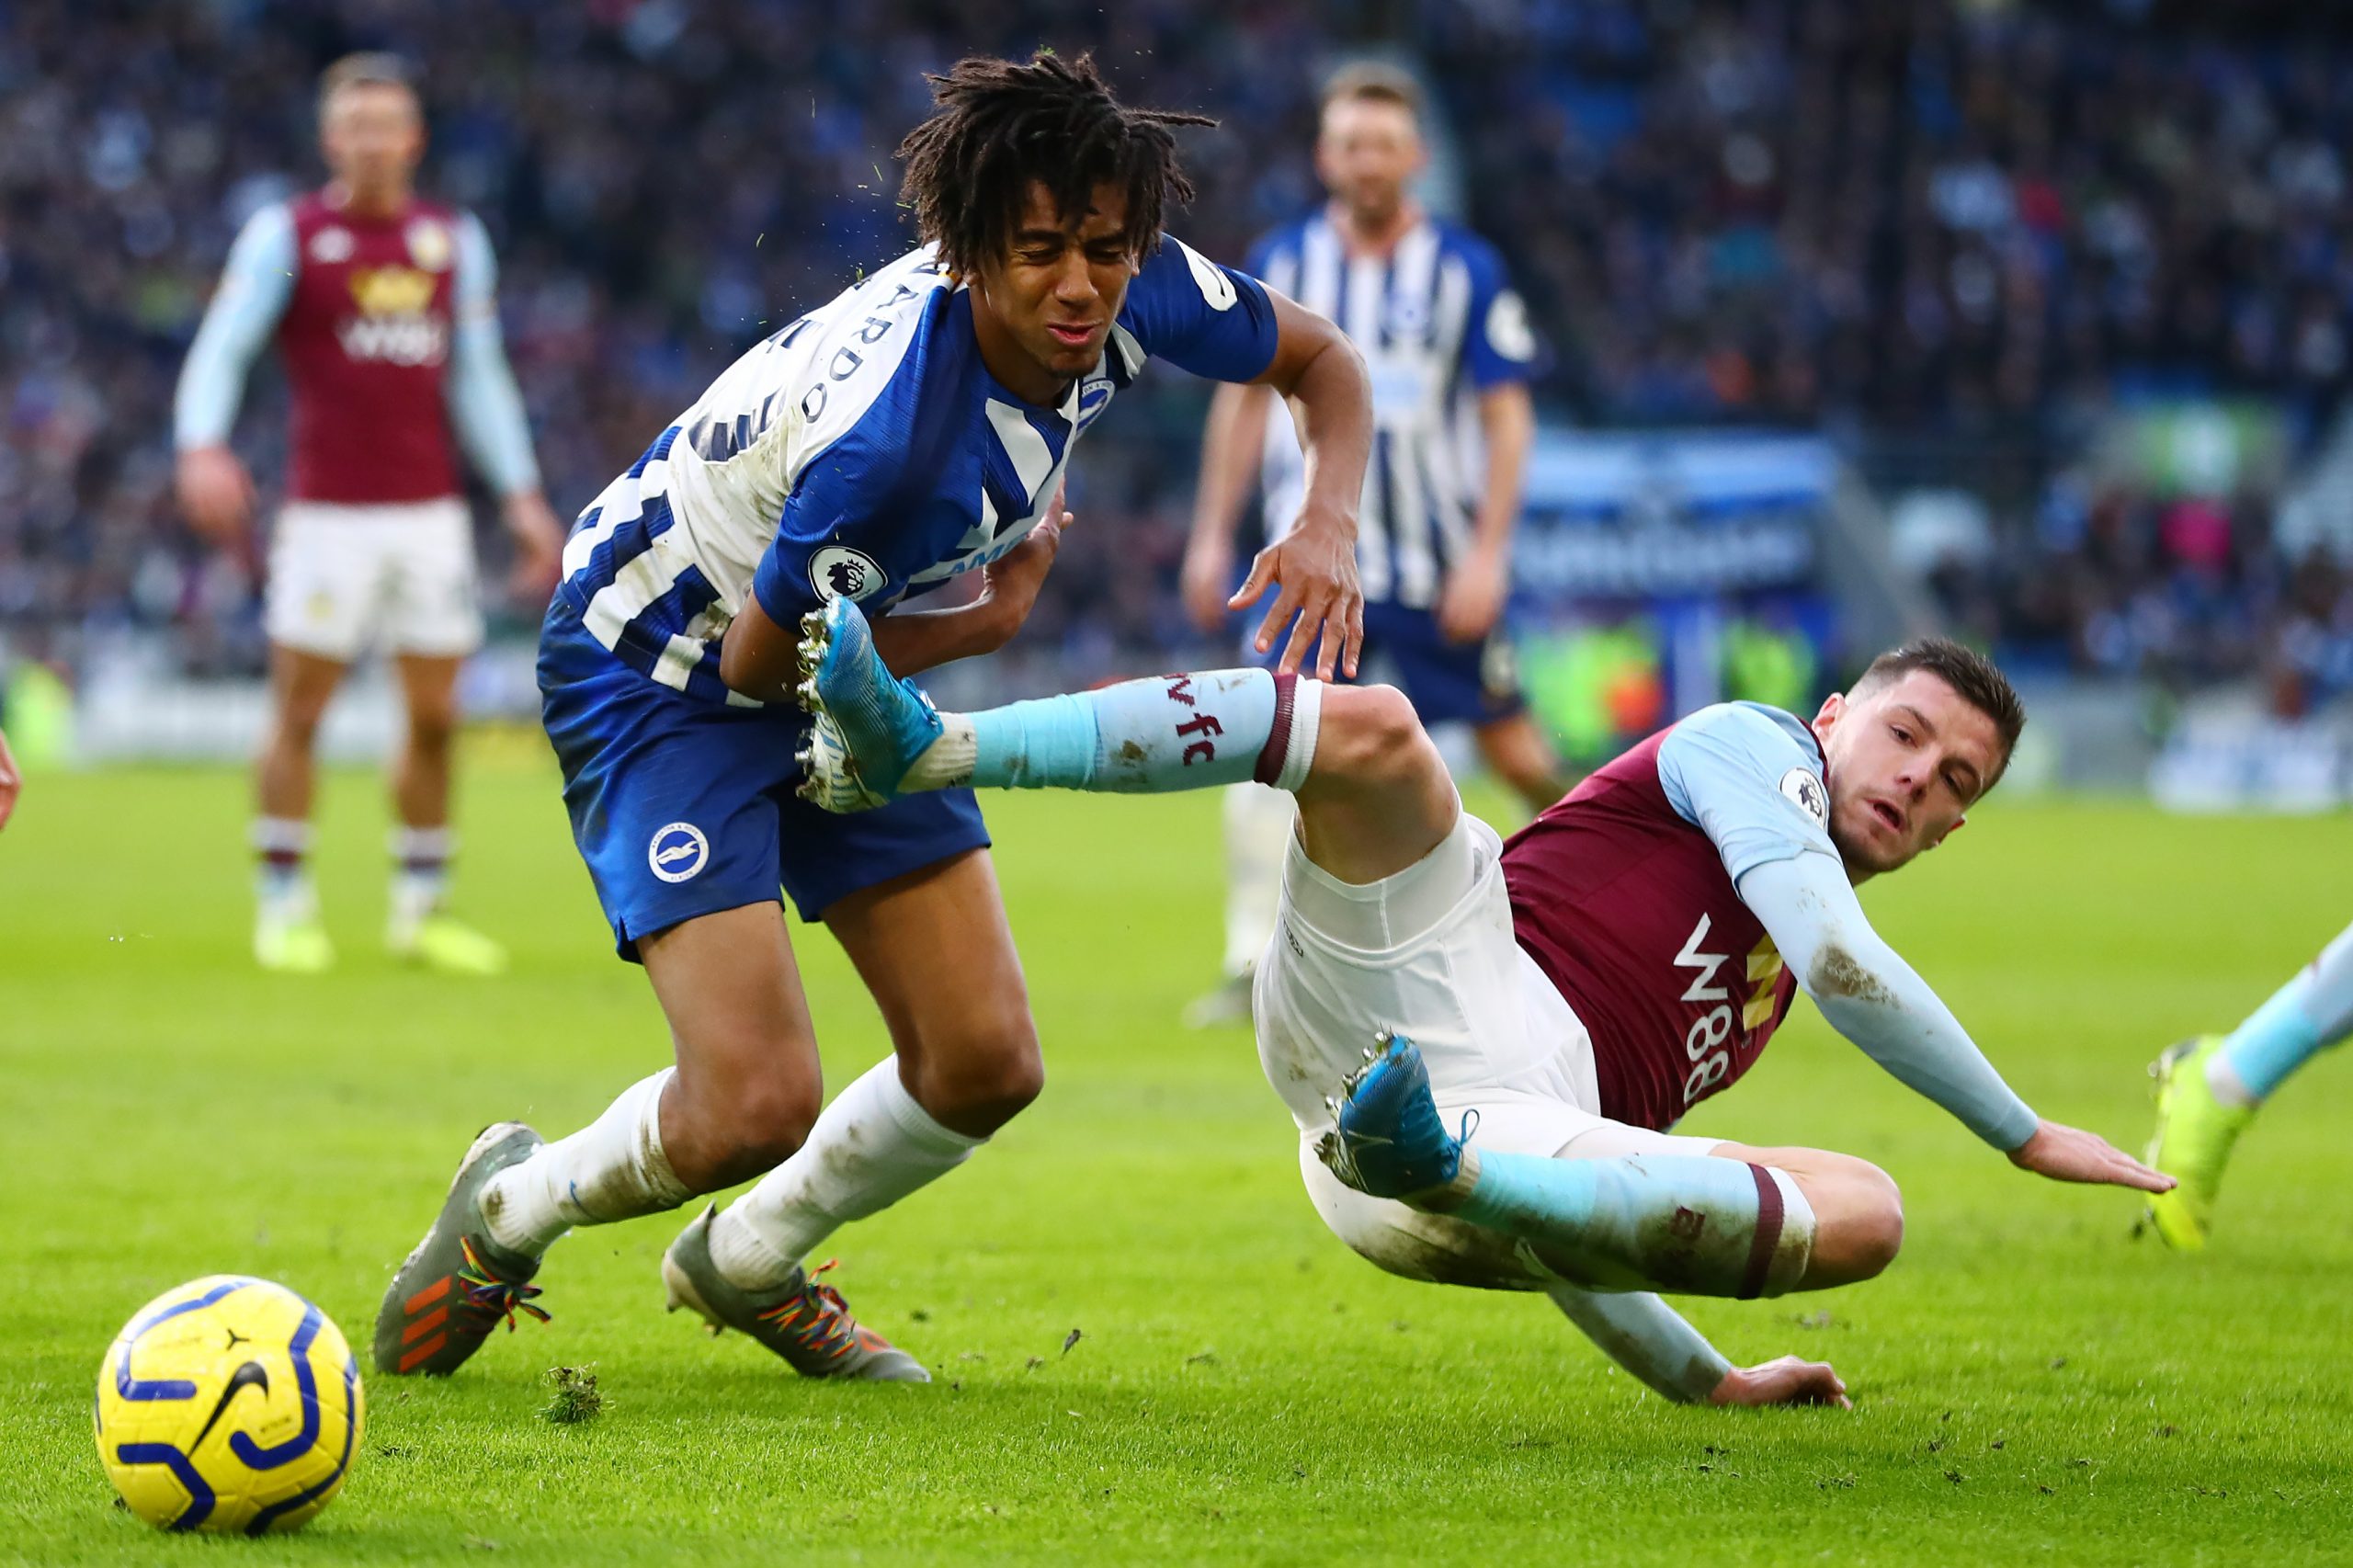 Aston Villa's Guilbert set to go out on loan (Guilbert is falling down in the picture)